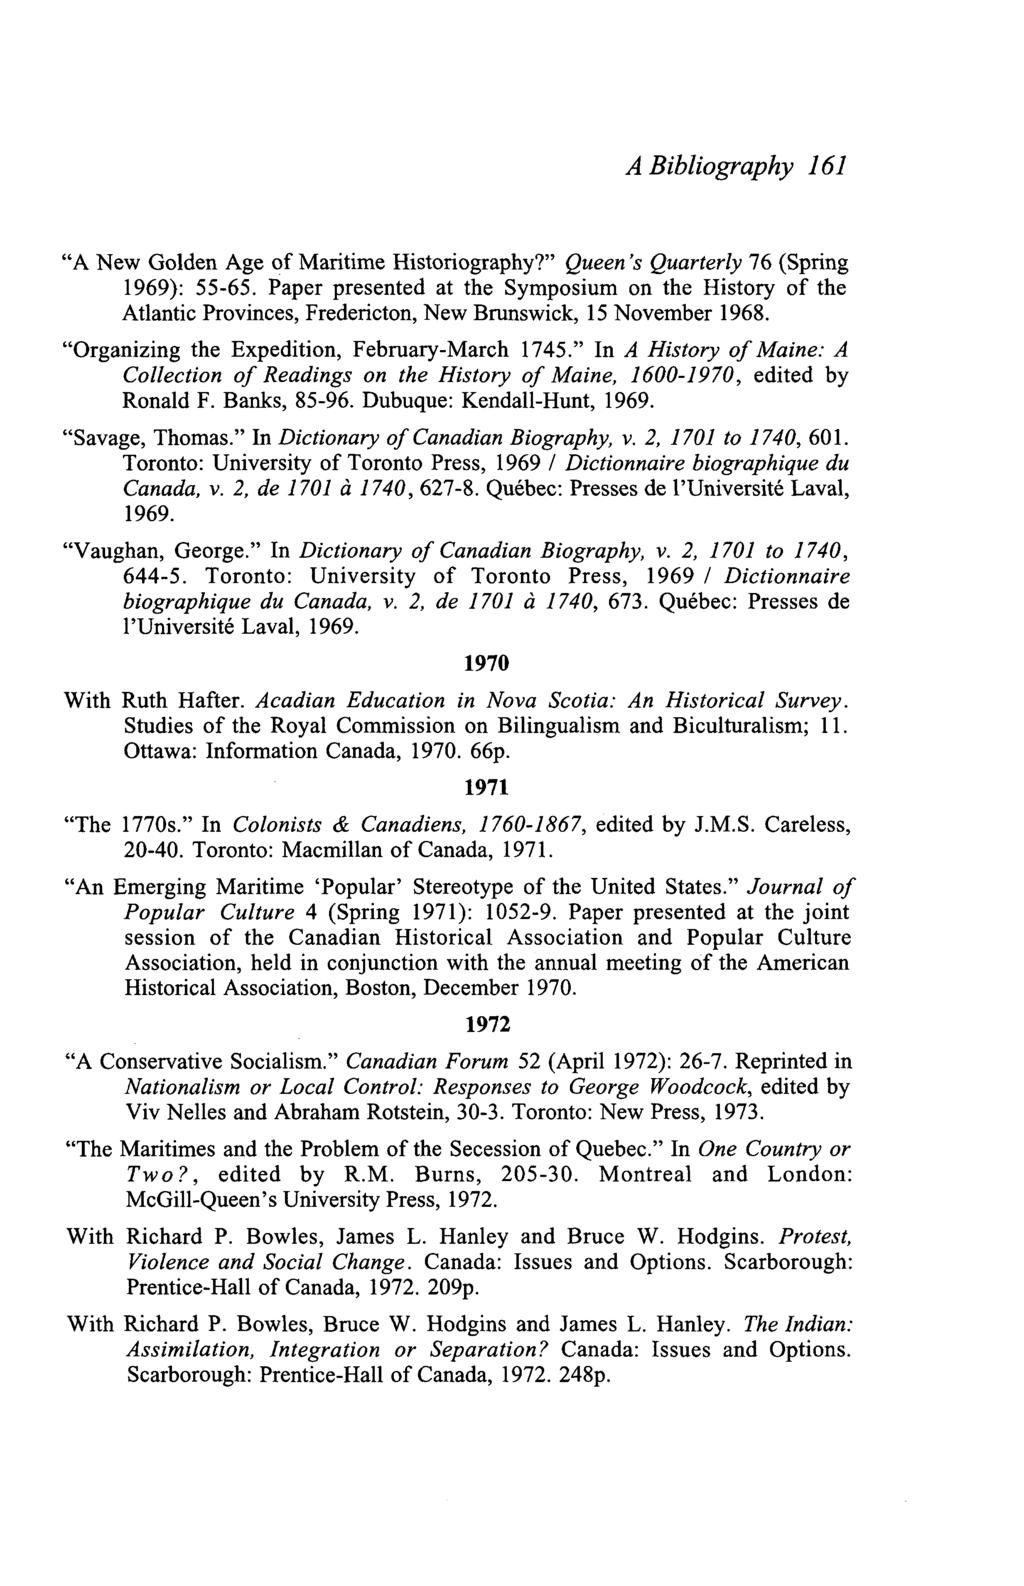 A Bibliography 161 "A New Golden Age of Maritime Historiography?" Queen's Quarterly 76 (Spring 1969): 55-65.